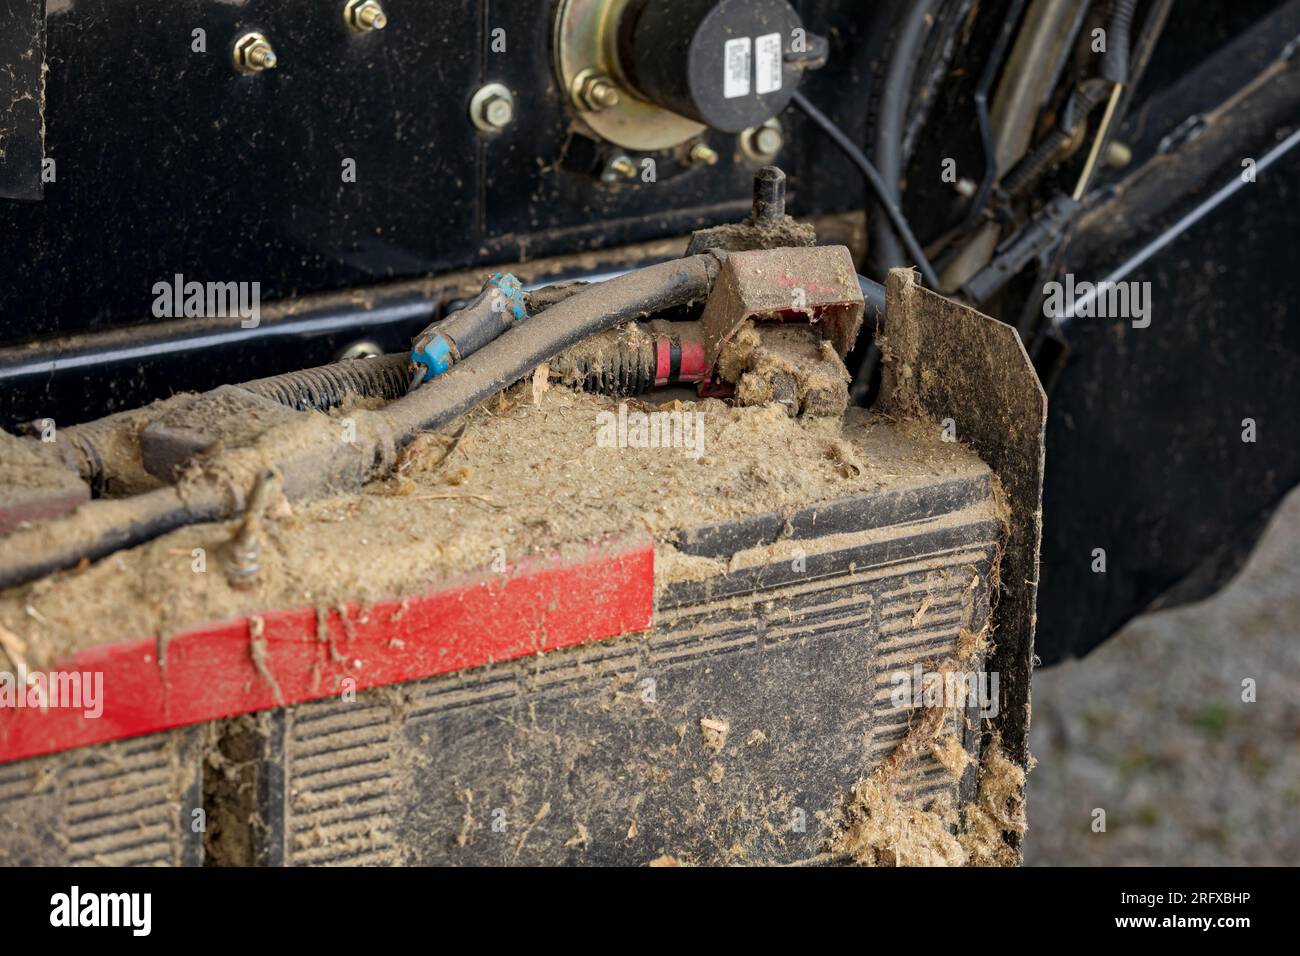 Dirty battery on combine harvester. Agriculture and farming equipment repair, maintenance and service concept Stock Photo